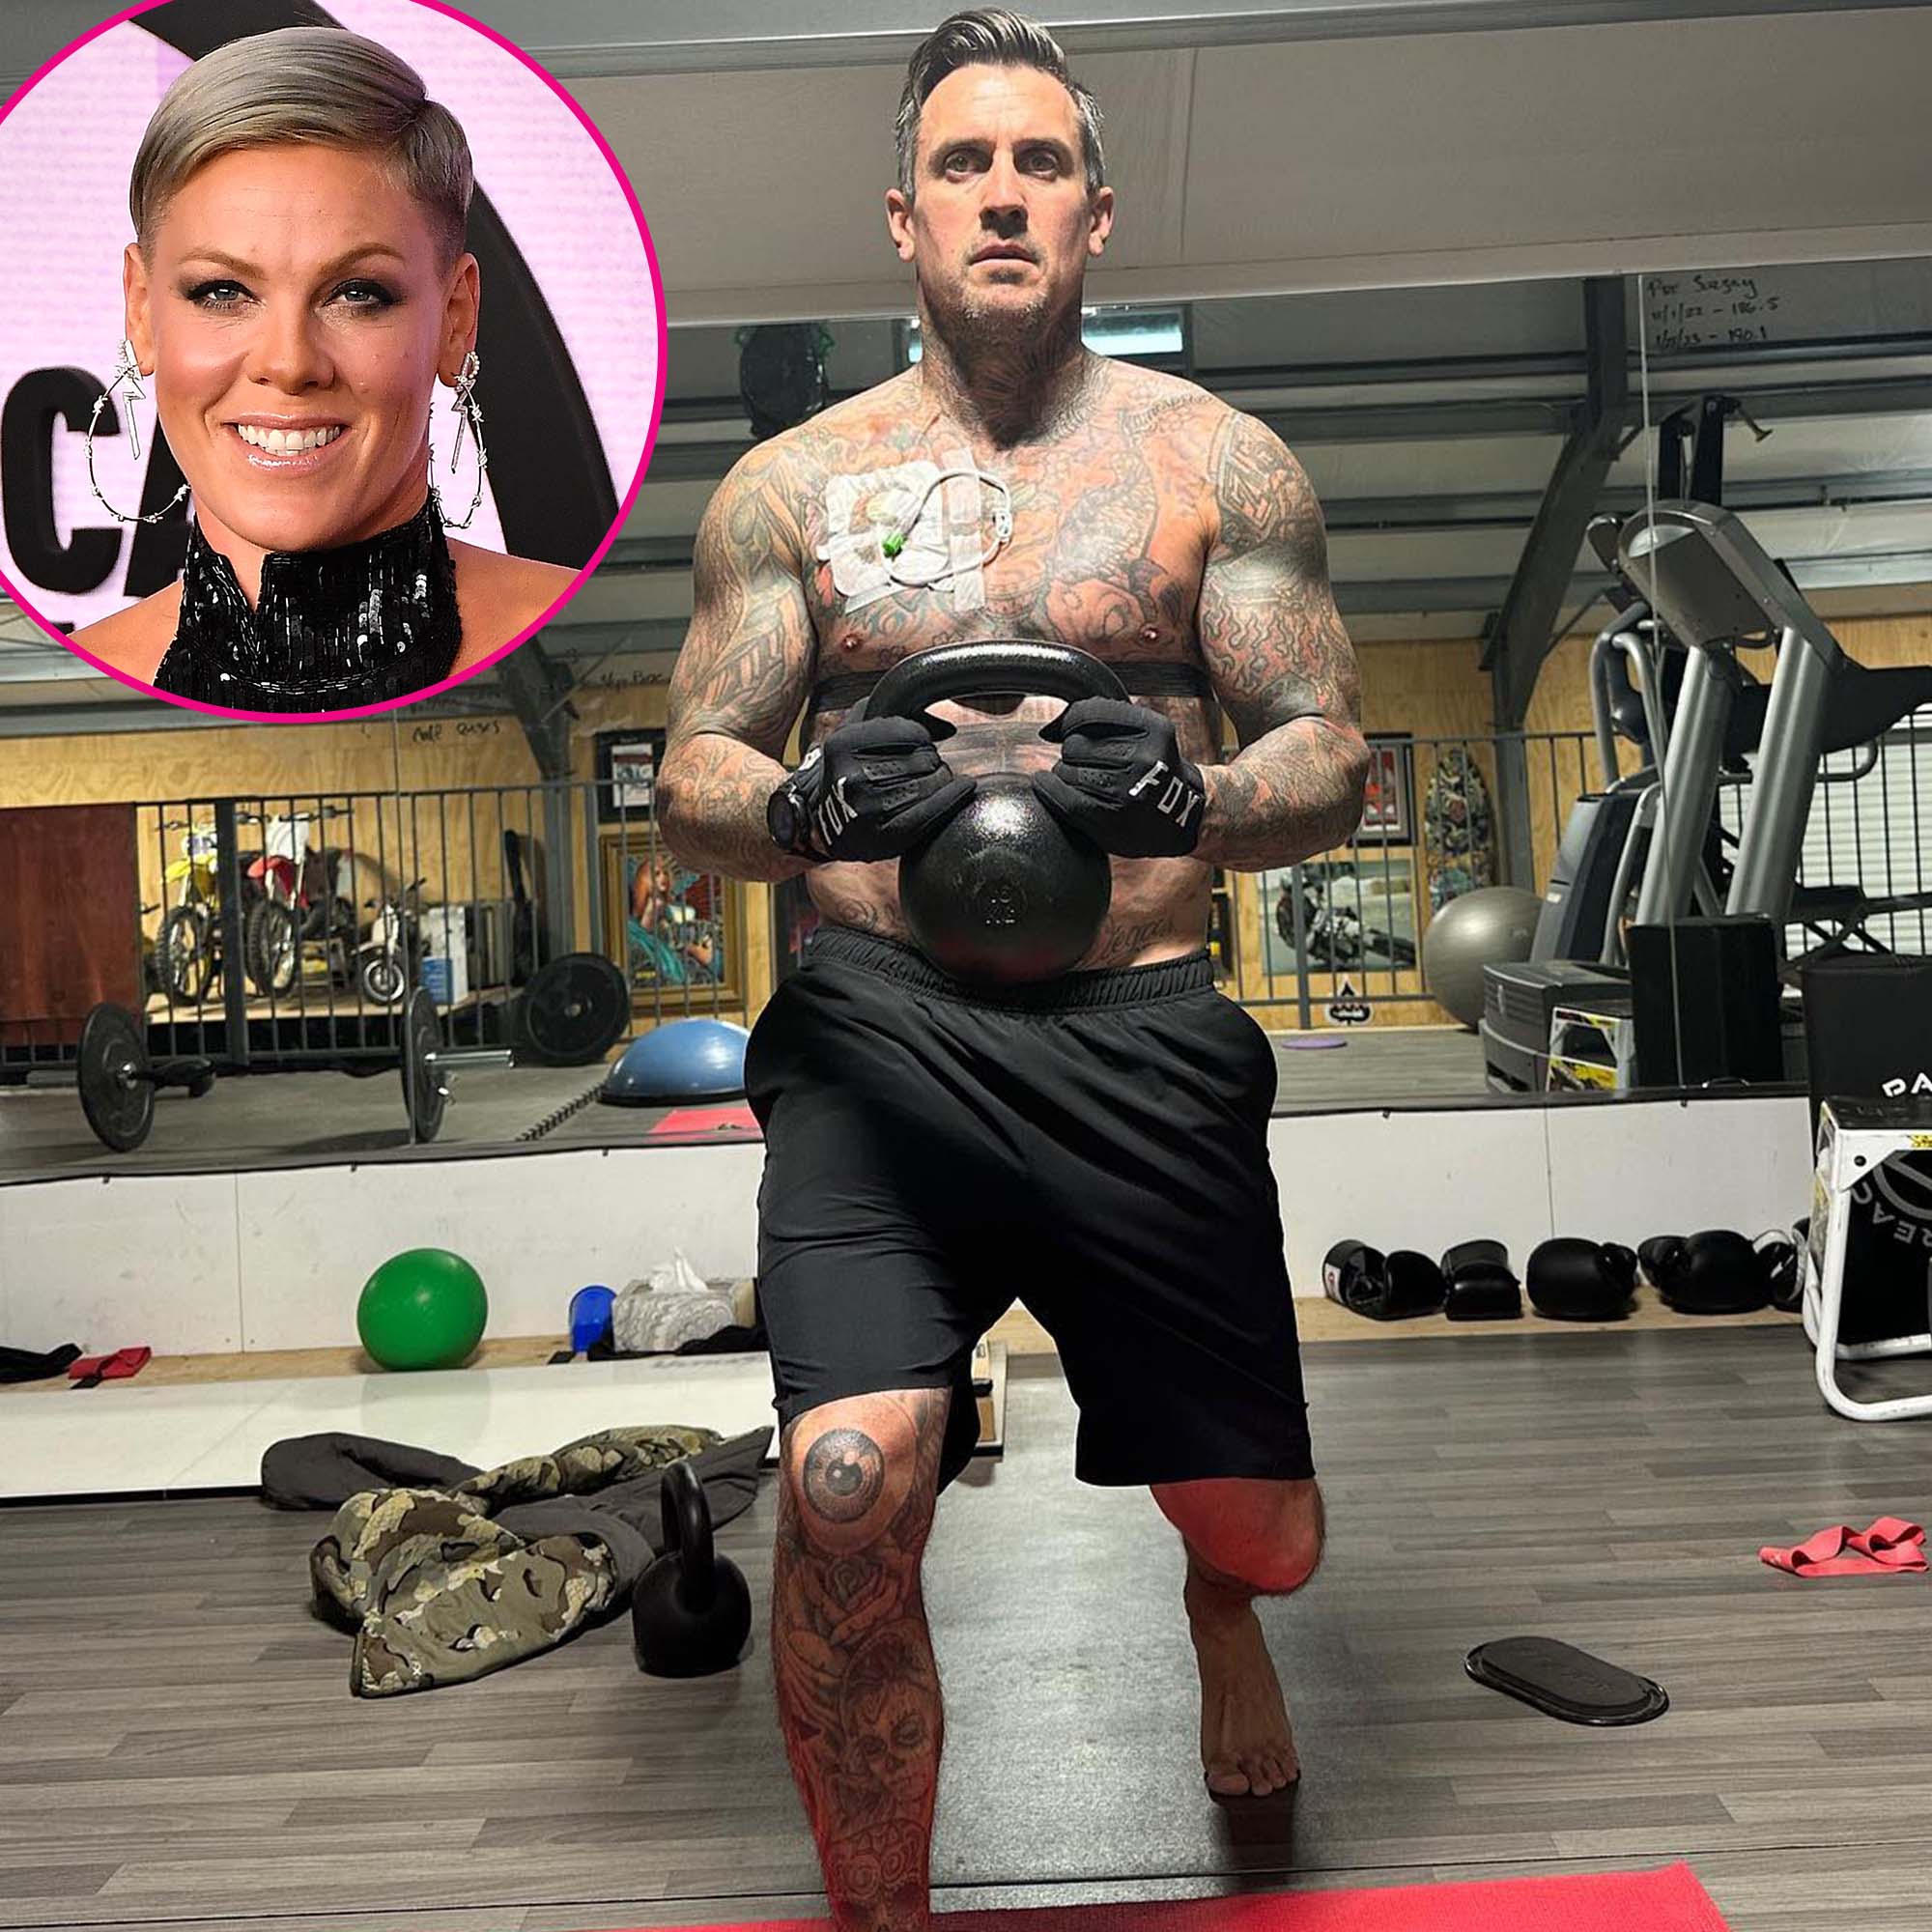 P!nk Shares Never-Before-Seen Photos with Carey Hart in Honor of Their  Anniversary